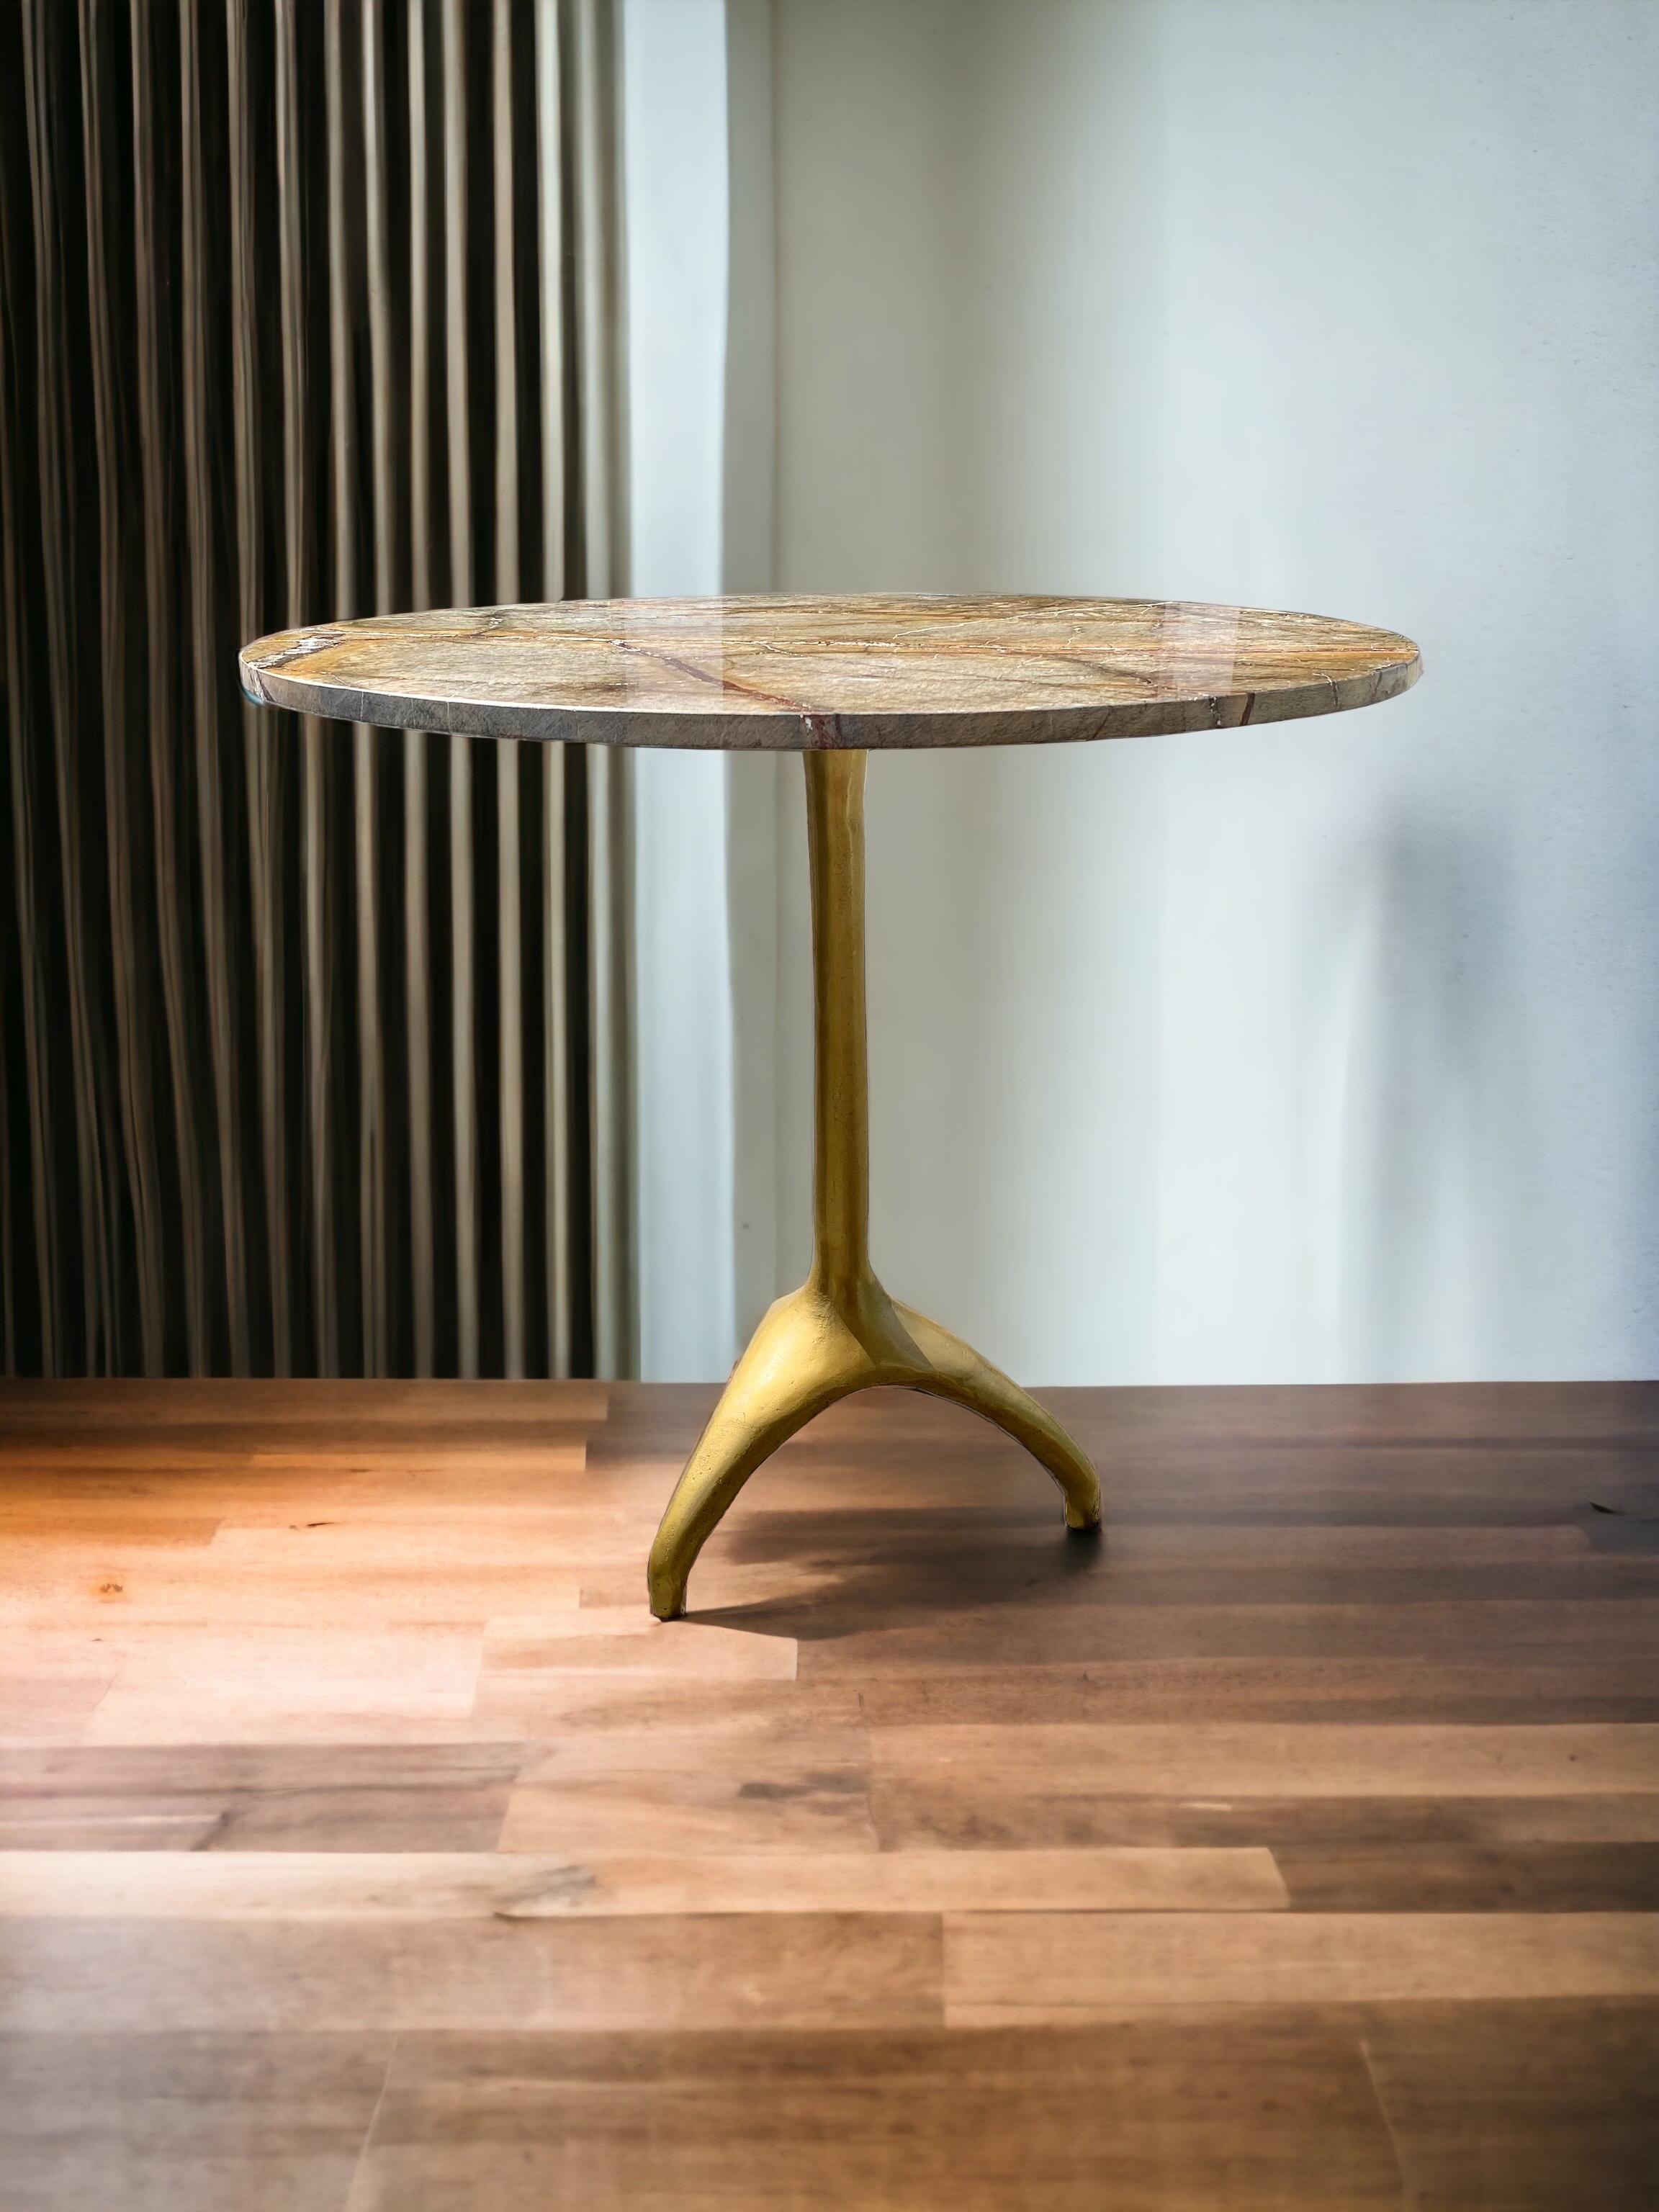 A Modern, Eclectic Bidasar Marble And Brass Clad Iron Pedestal Table 1